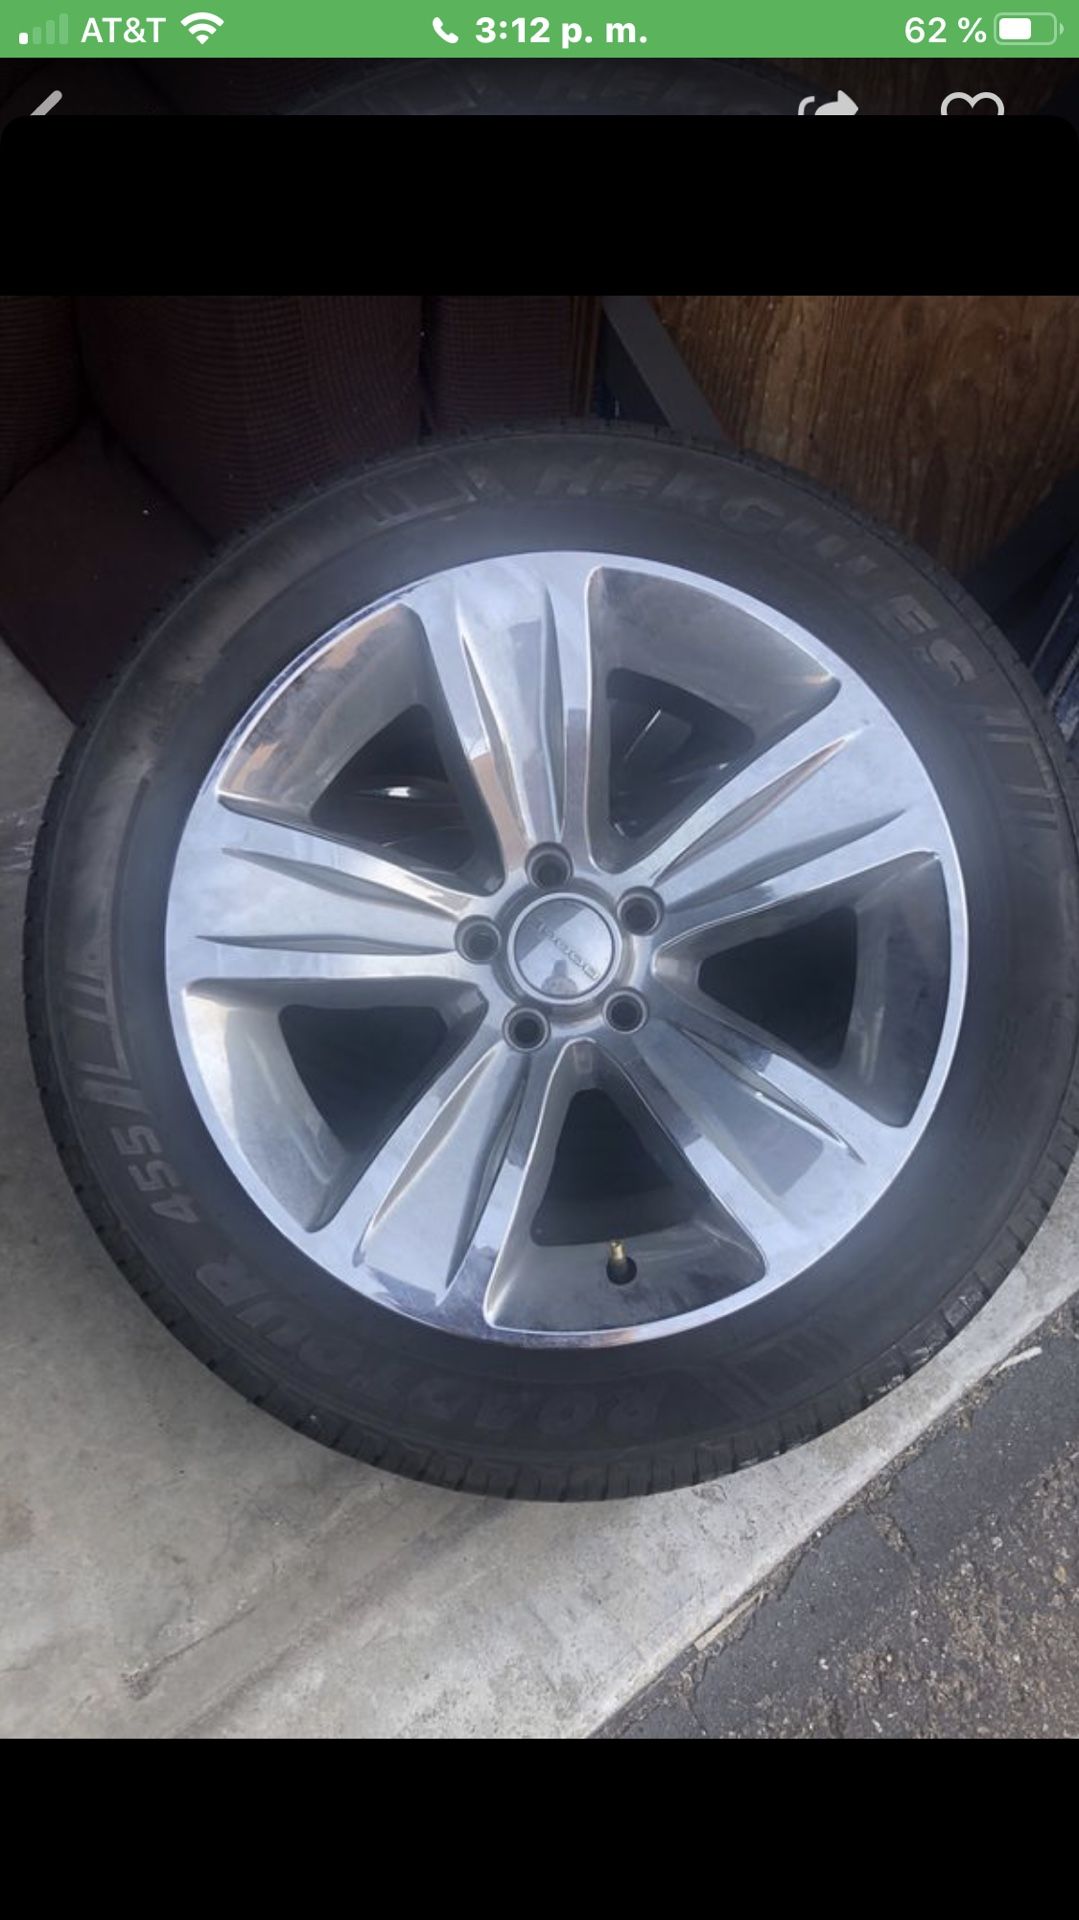 Hércules tires 235/55/18 was on a Dodge Charger